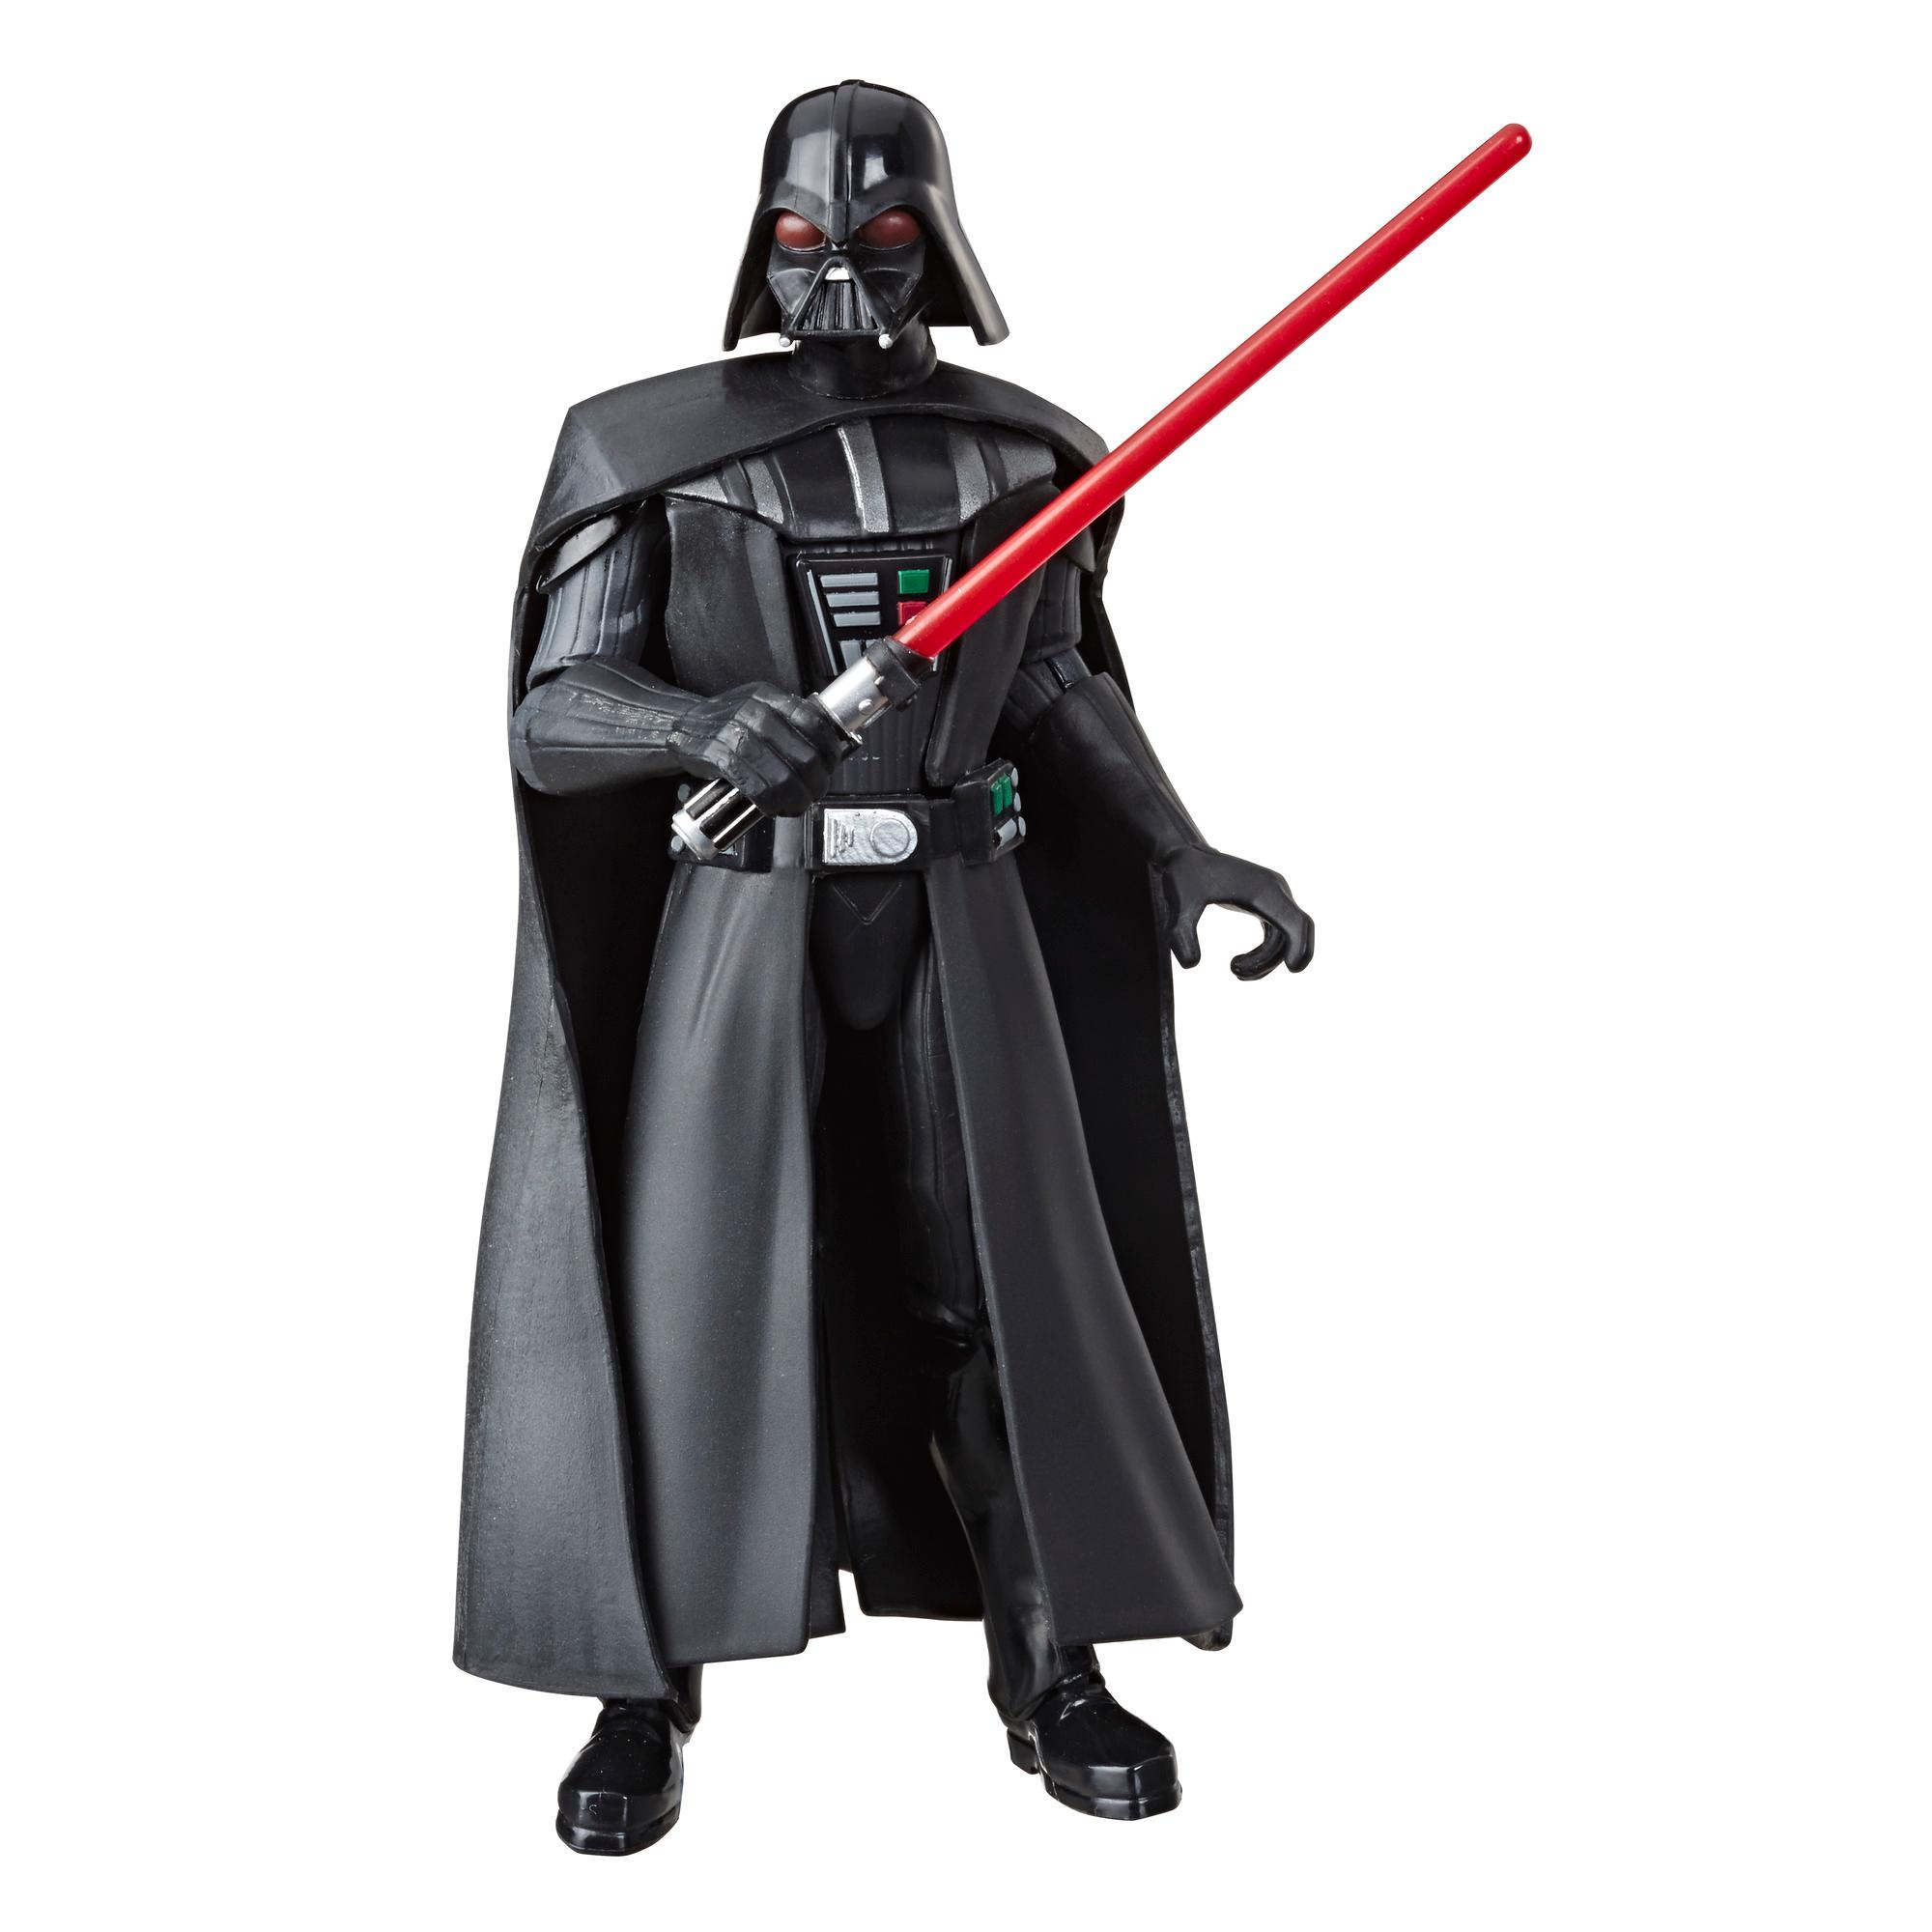 Star Wars Galaxy of Adventures Darth Vader 5-Inch-Scale Action Figure Toy